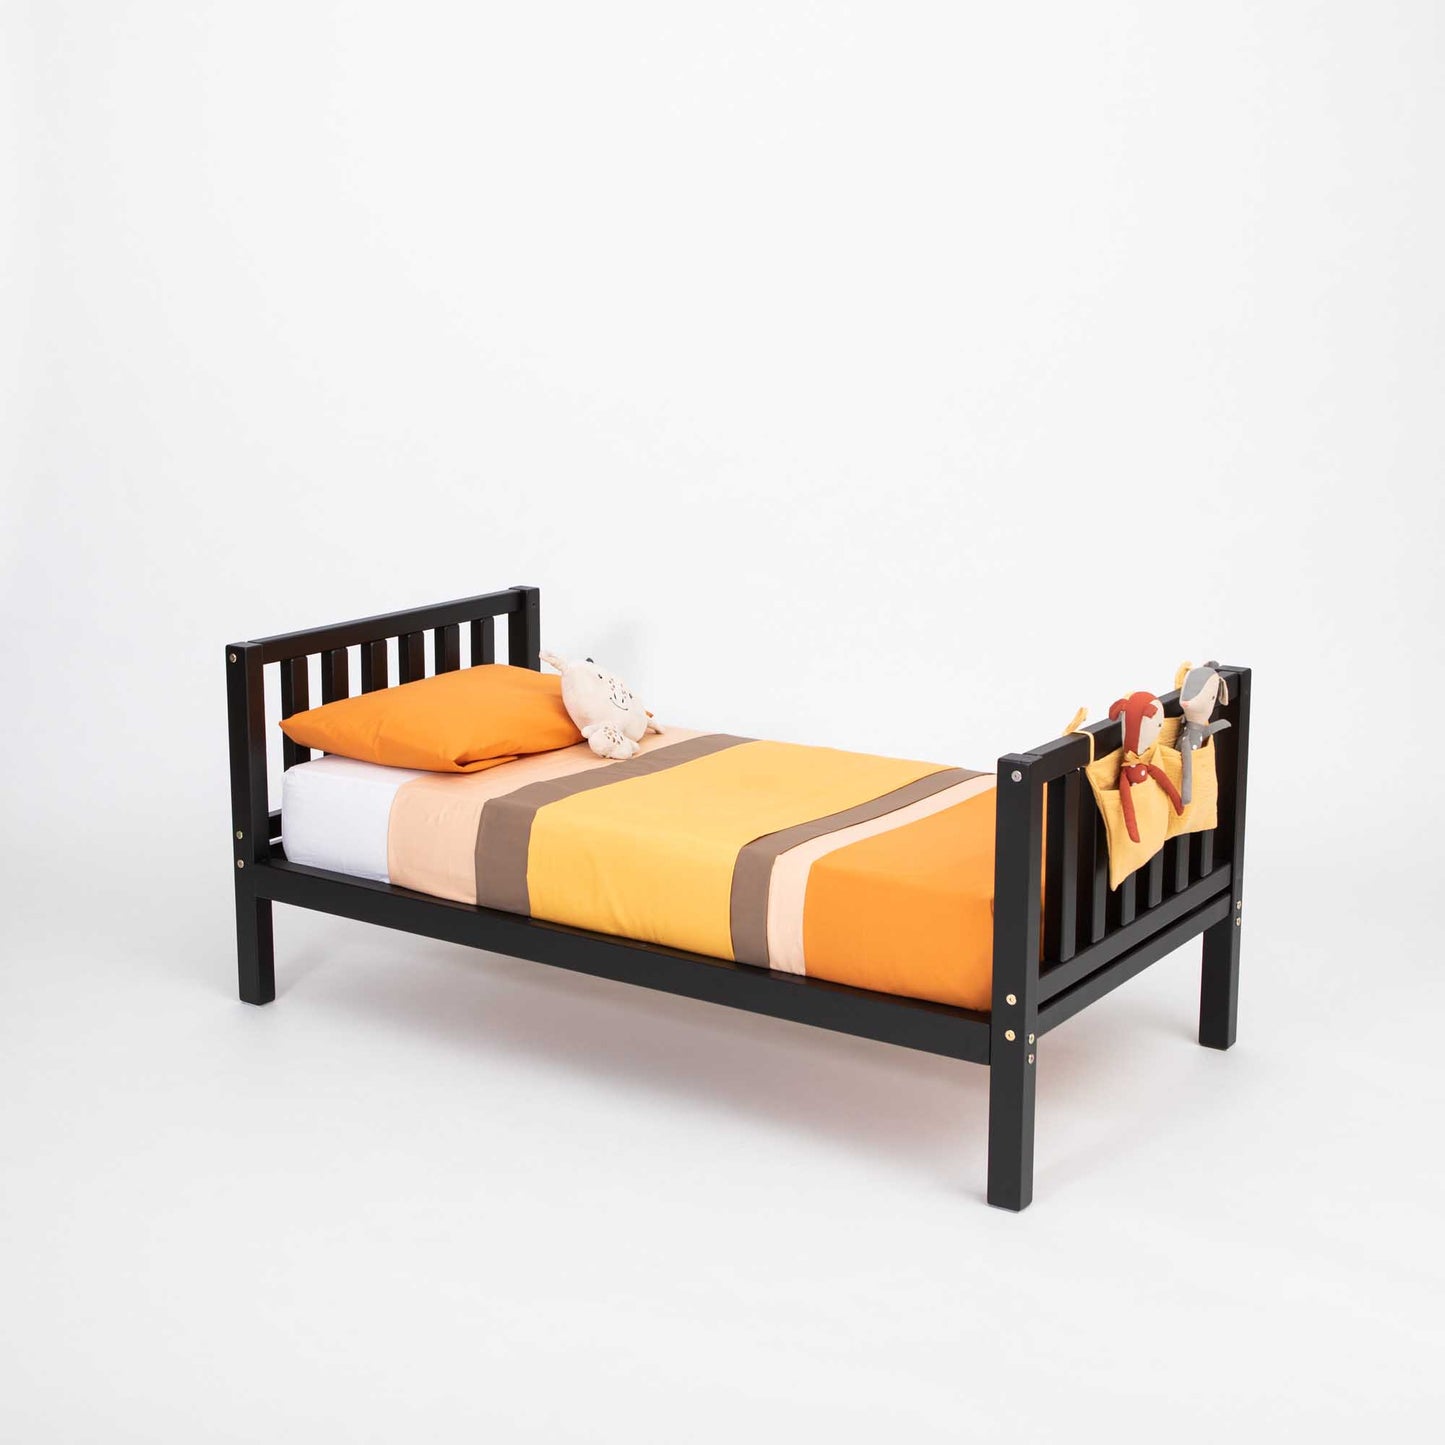 A 2-in-1 kid's bed on legs with a vertical rail headboard and footboard, featuring a floor-level design and adorned with an orange and black comforter.